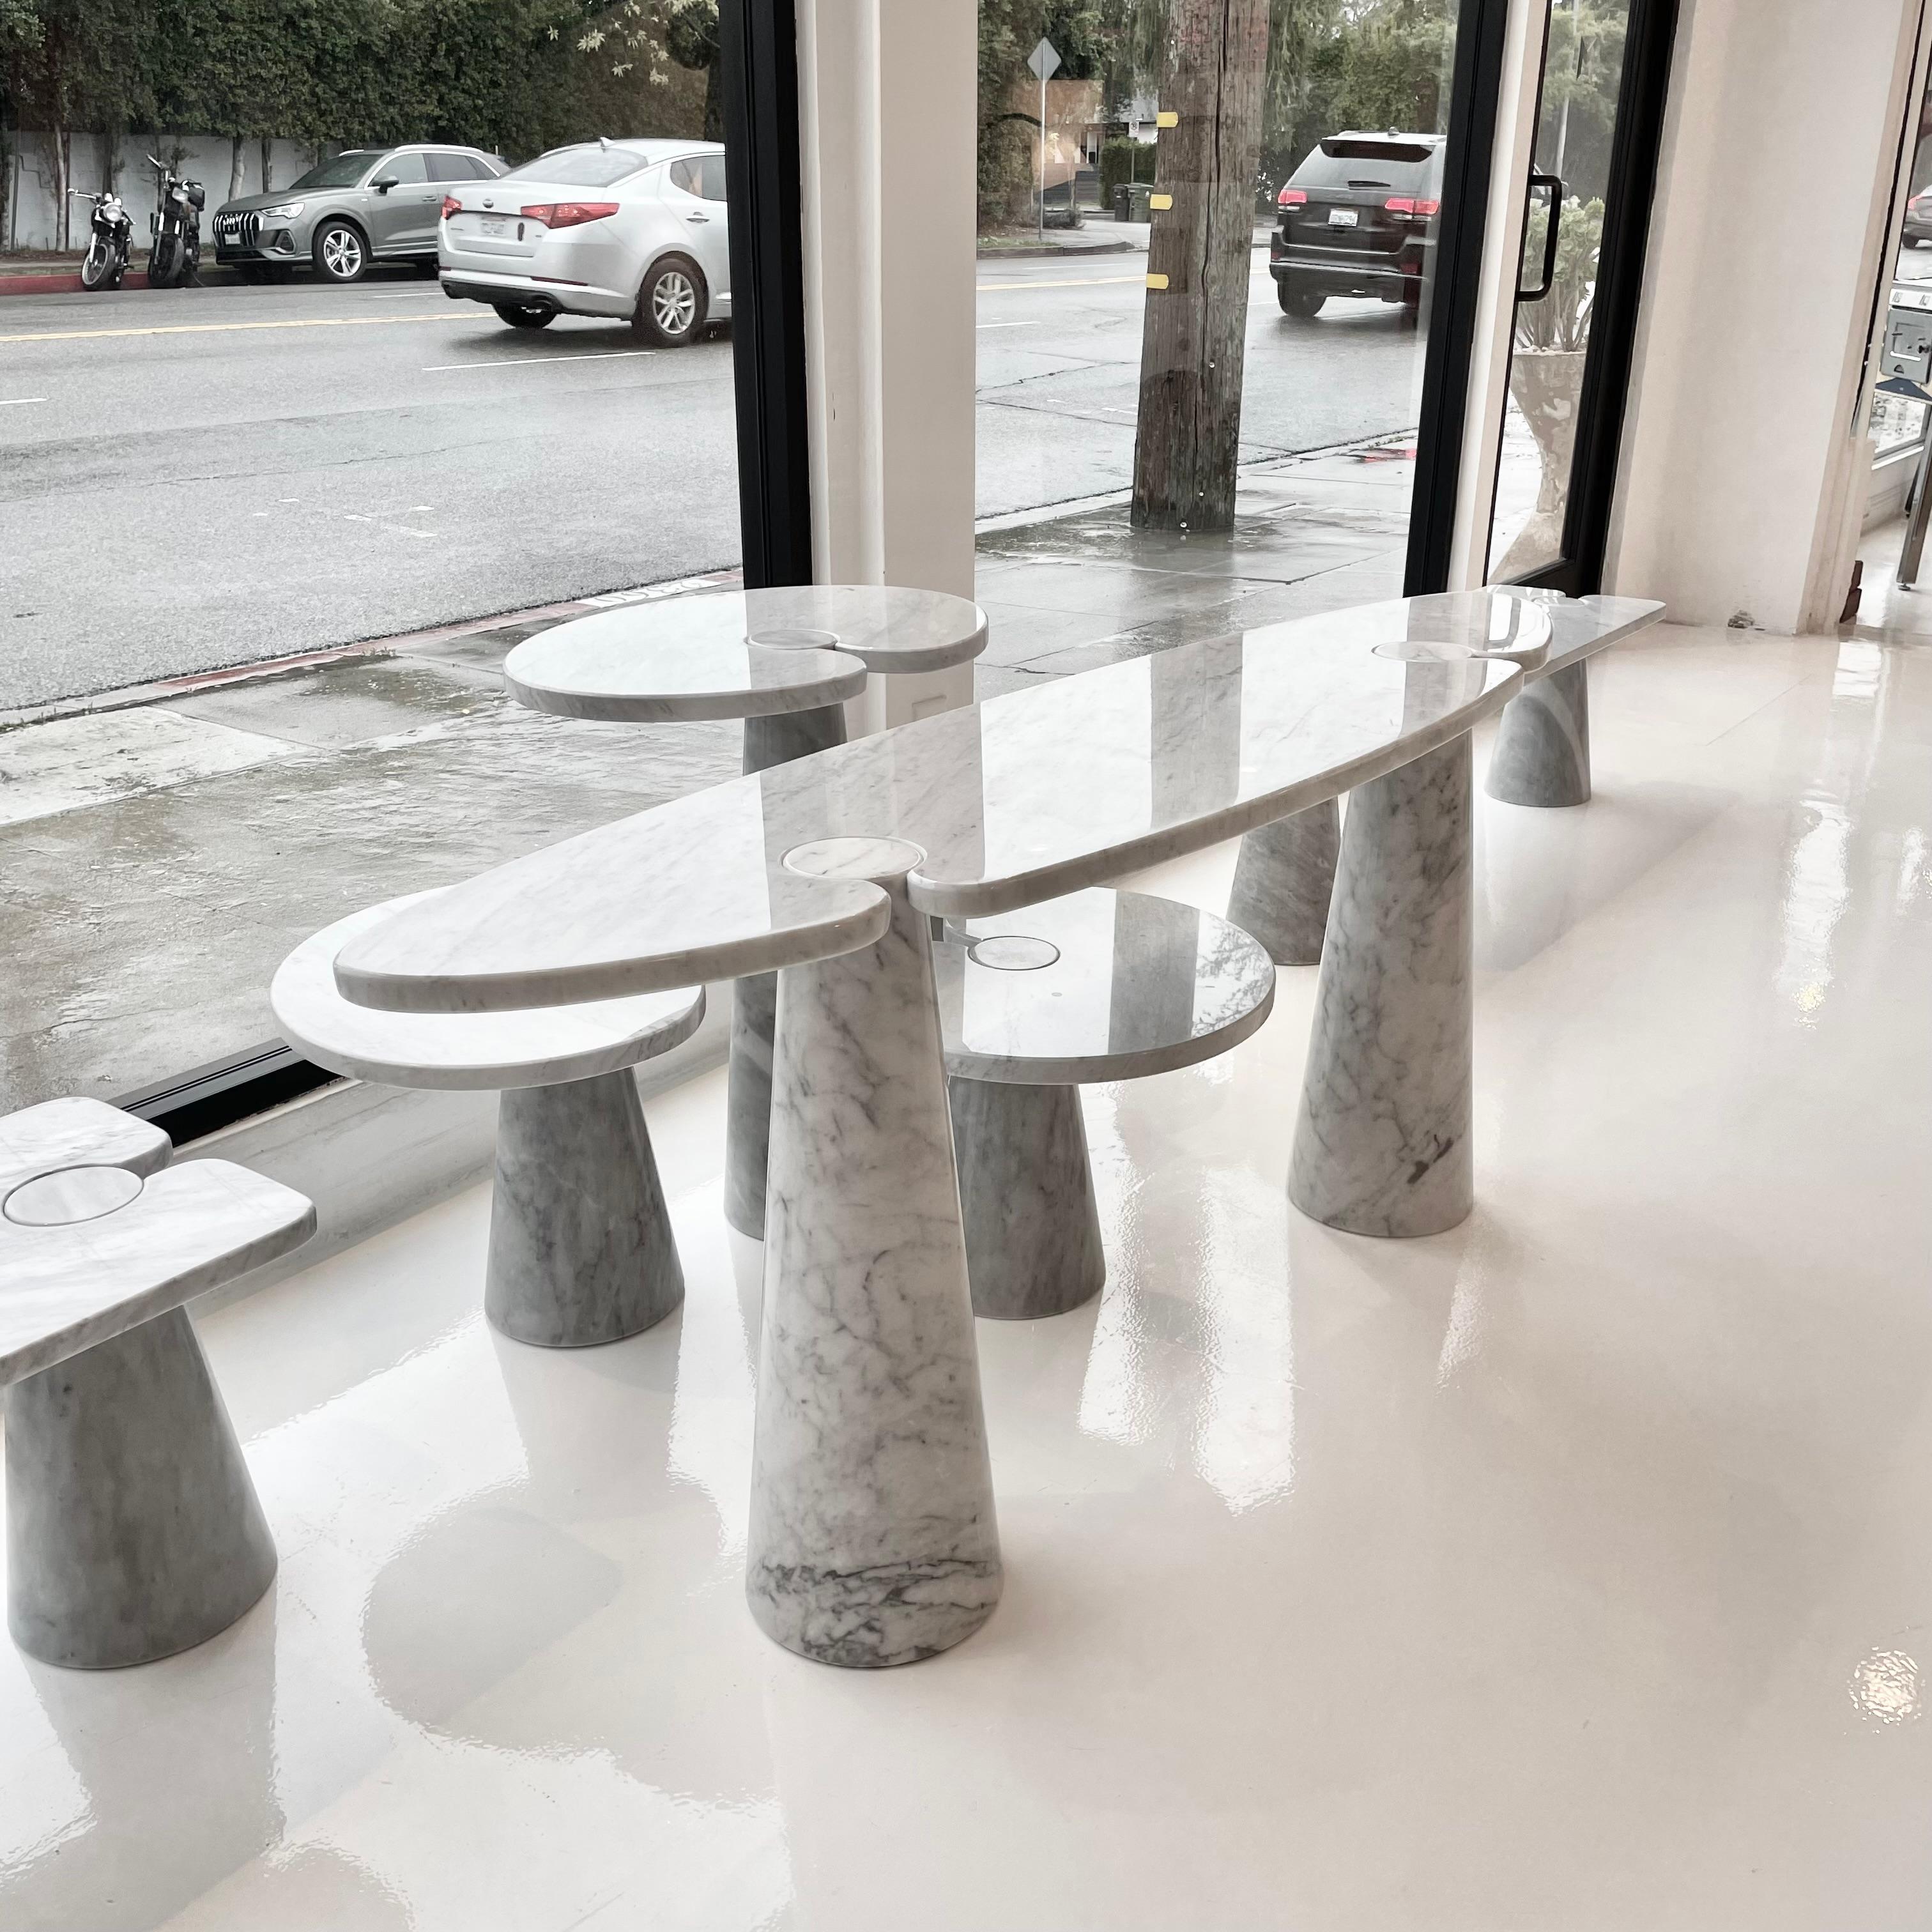 Elegant Carrara marble console table by Angelo Mangiarotti. Timeless style and simplicity as well as beautiful raw materials are what make this piece so special and sought after. Perfect to elevate any space. White and blue/grey veins run throughout